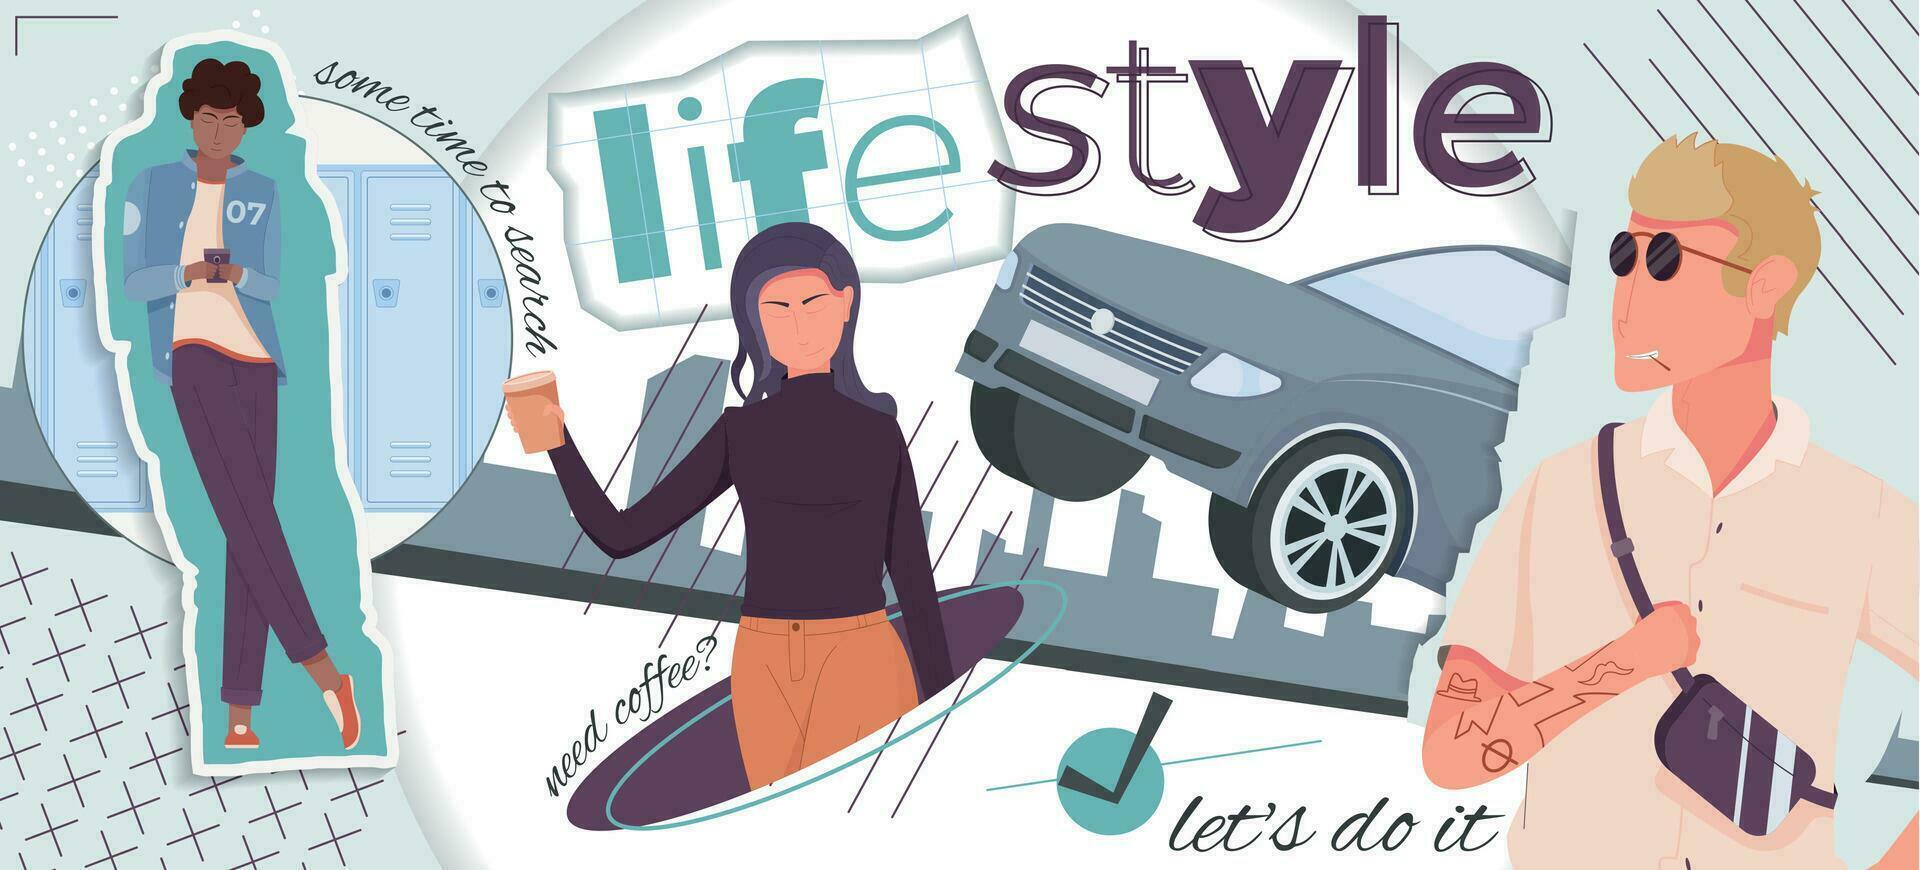 People Lifestyle Collage vector